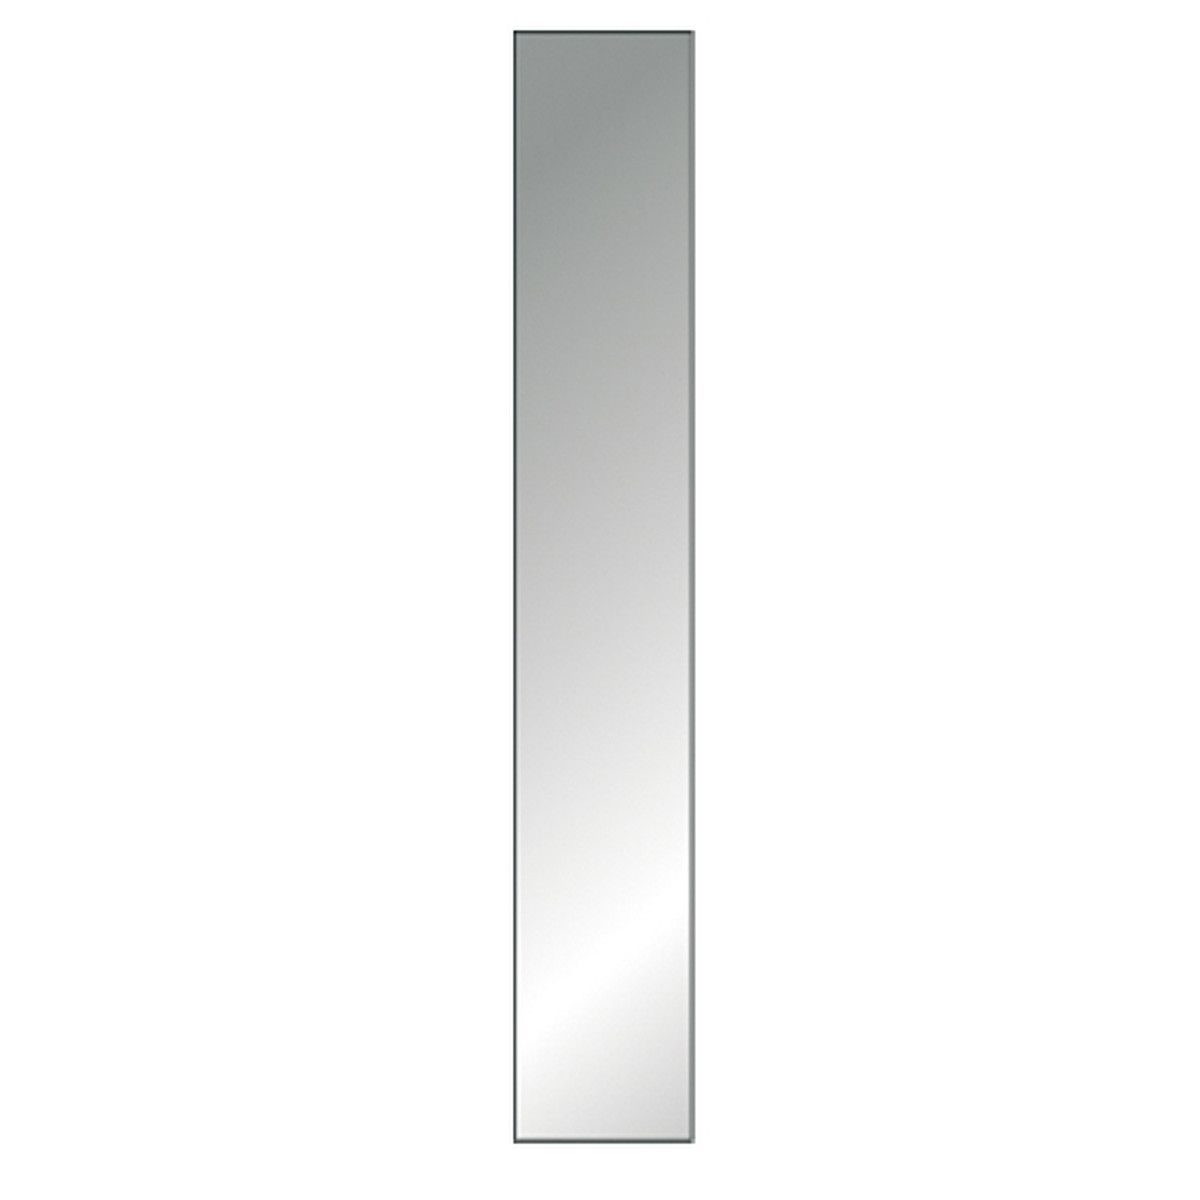 Wall Mirror No Frame Best Wall 2017 Intended For Large Mirror No Frame (View 12 of 15)